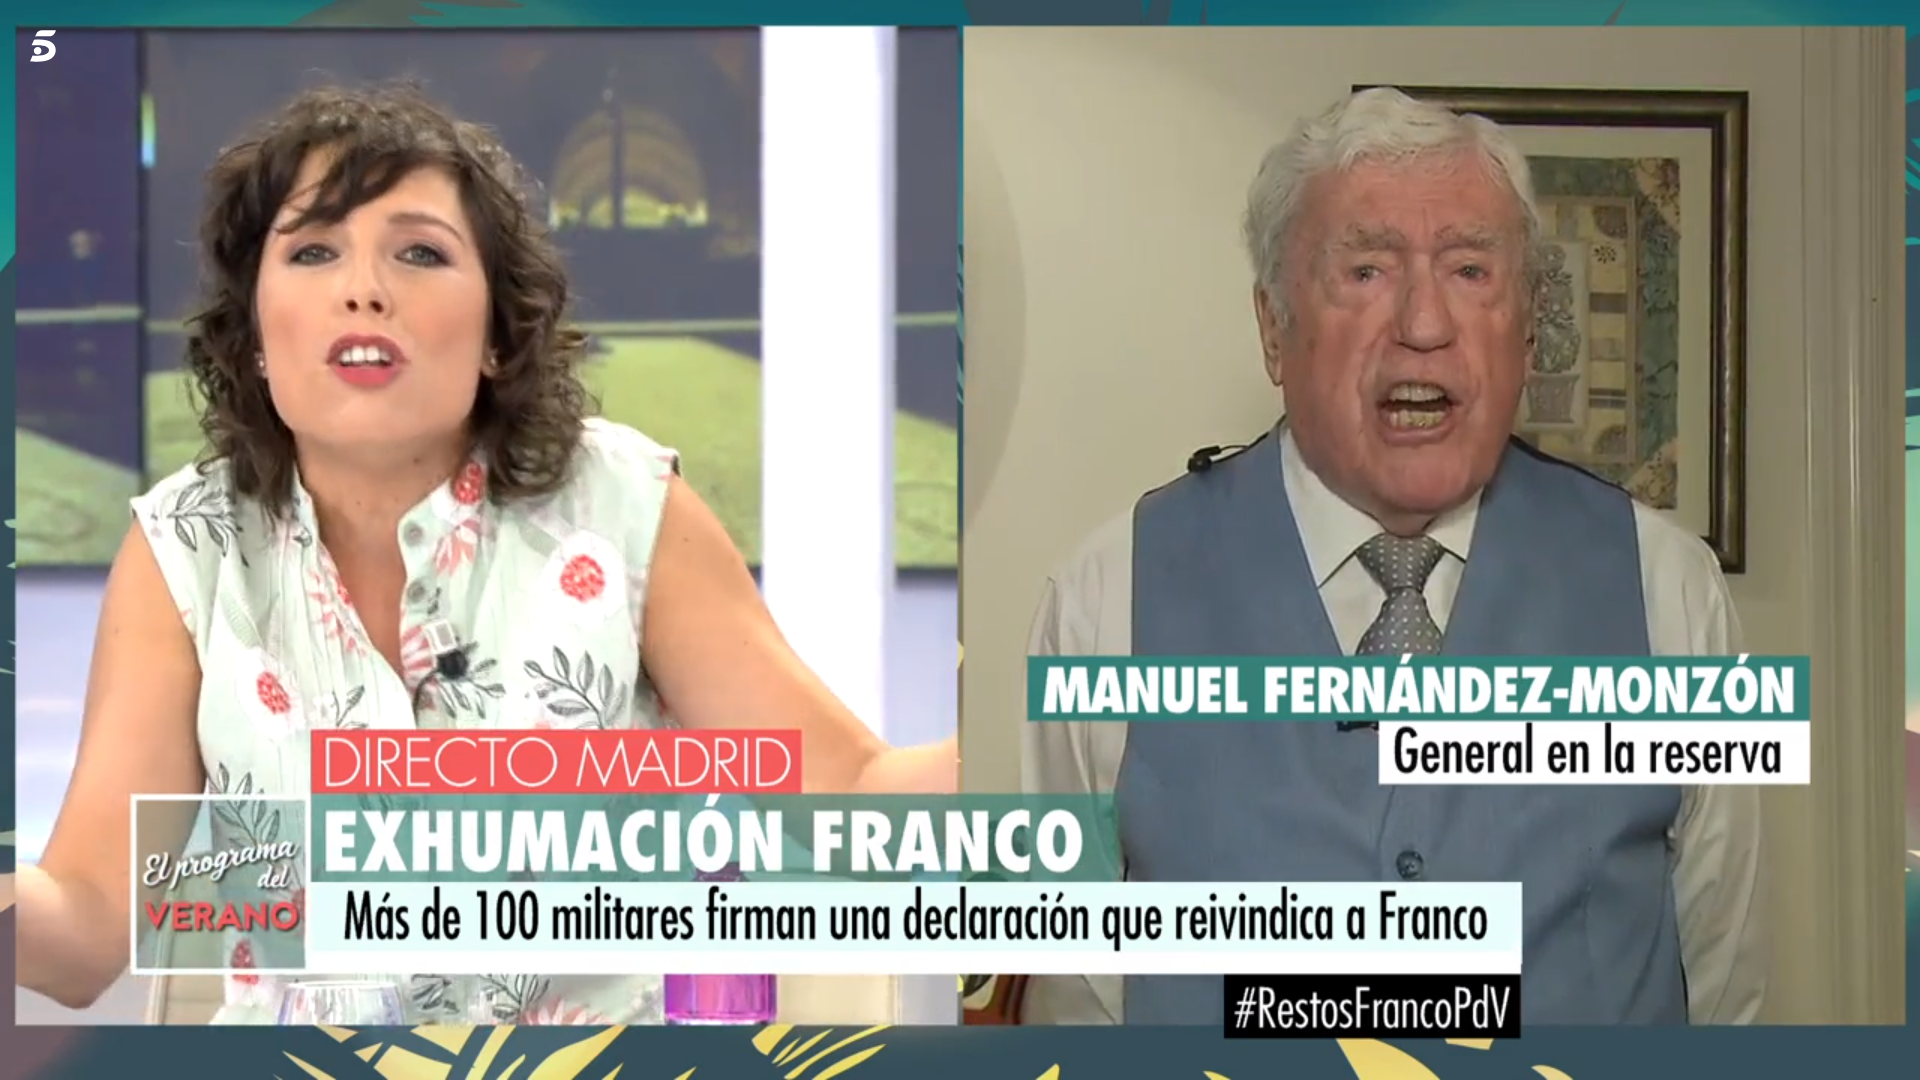 Spanish general defends Franco regime crimes as being "legal" at the time